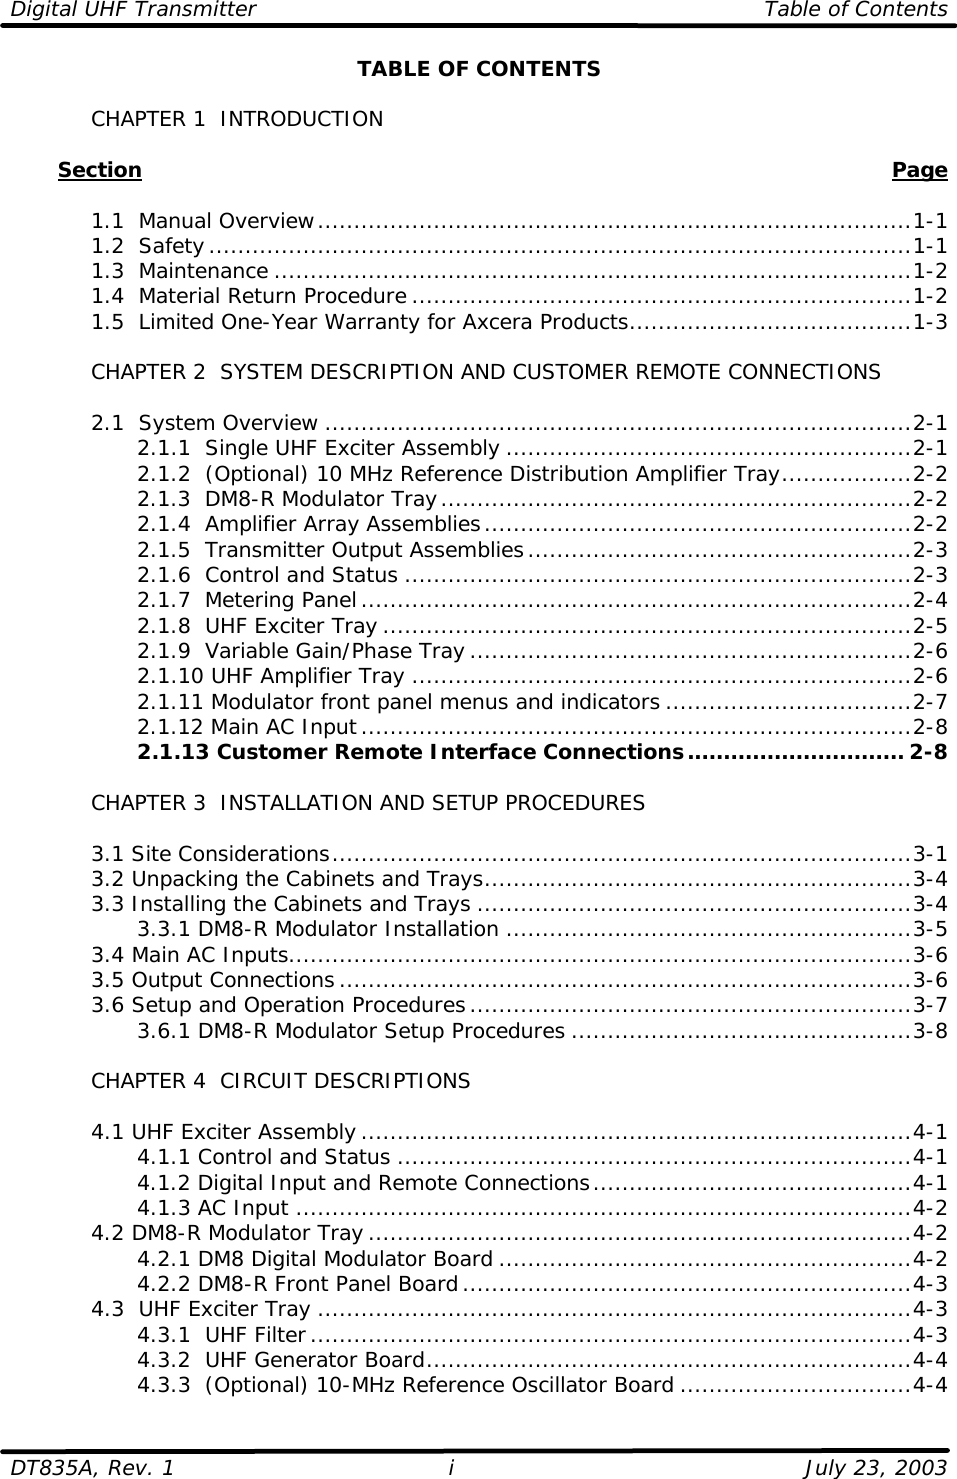 Digital UHF Transmitter Table of Contents  DT835A, Rev. 1 i July 23, 2003 TABLE OF CONTENTS   CHAPTER 1  INTRODUCTION         Section    Page   1.1  Manual Overview..................................................................................1-1  1.2  Safety.................................................................................................1-1  1.3  Maintenance ........................................................................................1-2  1.4  Material Return Procedure .....................................................................1-2  1.5  Limited One-Year Warranty for Axcera Products.......................................1-3   CHAPTER 2  SYSTEM DESCRIPTION AND CUSTOMER REMOTE CONNECTIONS   2.1  System Overview .................................................................................2-1     2.1.1  Single UHF Exciter Assembly ........................................................2-1     2.1.2  (Optional) 10 MHz Reference Distribution Amplifier Tray..................2-2     2.1.3  DM8-R Modulator Tray.................................................................2-2     2.1.4  Amplifier Array Assemblies...........................................................2-2     2.1.5  Transmitter Output Assemblies.....................................................2-3     2.1.6  Control and Status ......................................................................2-3     2.1.7  Metering Panel............................................................................2-4     2.1.8  UHF Exciter Tray .........................................................................2-5     2.1.9  Variable Gain/Phase Tray .............................................................2-6     2.1.10 UHF Amplifier Tray .....................................................................2-6     2.1.11 Modulator front panel menus and indicators ..................................2-7     2.1.12 Main AC Input............................................................................2-8     2.1.13 Customer Remote Interface Connections.............................. 2-8     CHAPTER 3  INSTALLATION AND SETUP PROCEDURES     3.1 Site Considerations................................................................................3-1  3.2 Unpacking the Cabinets and Trays...........................................................3-4  3.3 Installing the Cabinets and Trays ............................................................3-4     3.3.1 DM8-R Modulator Installation ........................................................3-5  3.4 Main AC Inputs......................................................................................3-6  3.5 Output Connections...............................................................................3-6  3.6 Setup and Operation Procedures.............................................................3-7     3.6.1 DM8-R Modulator Setup Procedures ...............................................3-8   CHAPTER 4  CIRCUIT DESCRIPTIONS   4.1 UHF Exciter Assembly ............................................................................4-1     4.1.1 Control and Status .......................................................................4-1     4.1.2 Digital Input and Remote Connections............................................4-1     4.1.3 AC Input .....................................................................................4-2  4.2 DM8-R Modulator Tray...........................................................................4-2     4.2.1 DM8 Digital Modulator Board .........................................................4-2     4.2.2 DM8-R Front Panel Board..............................................................4-3  4.3  UHF Exciter Tray ..................................................................................4-3     4.3.1  UHF Filter...................................................................................4-3     4.3.2  UHF Generator Board...................................................................4-4     4.3.3  (Optional) 10-MHz Reference Oscillator Board ................................4-4 